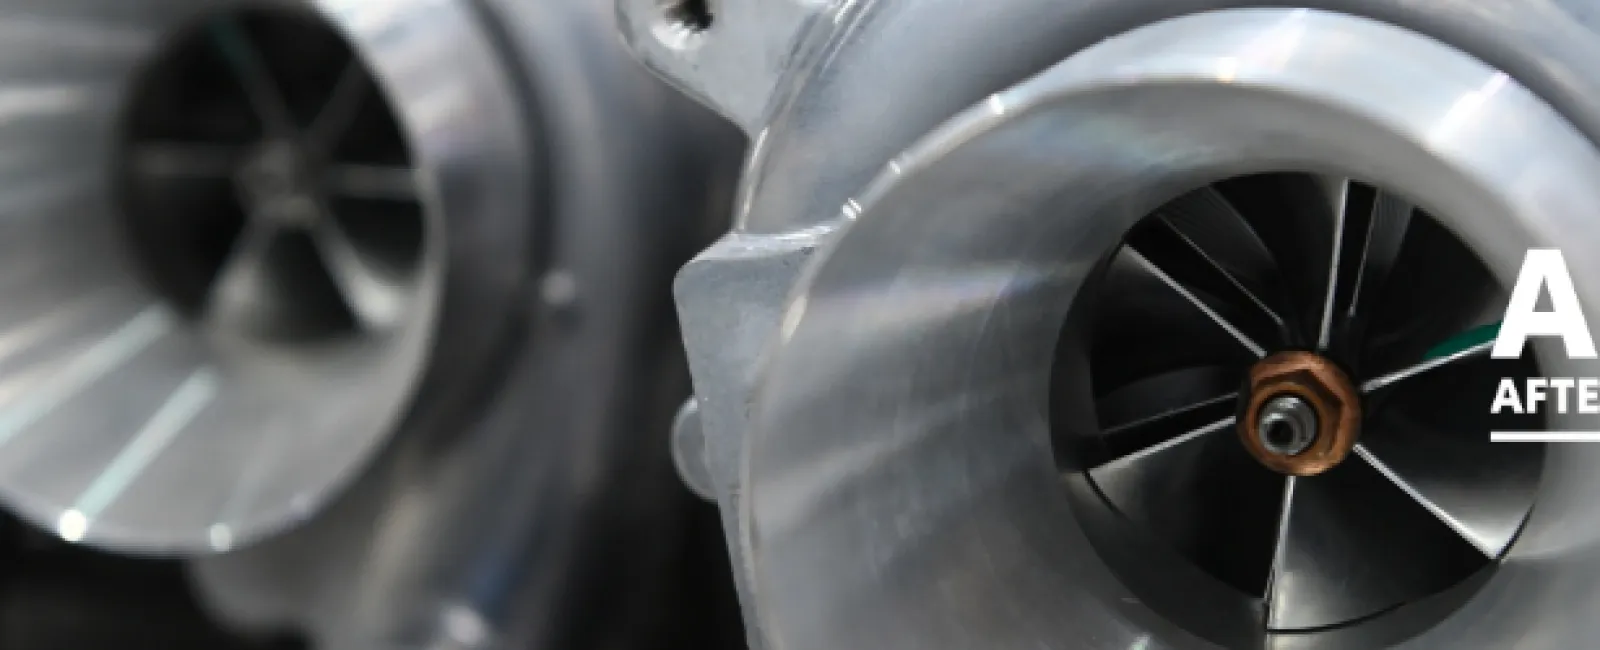 Common Turbocharger Problems and Failures